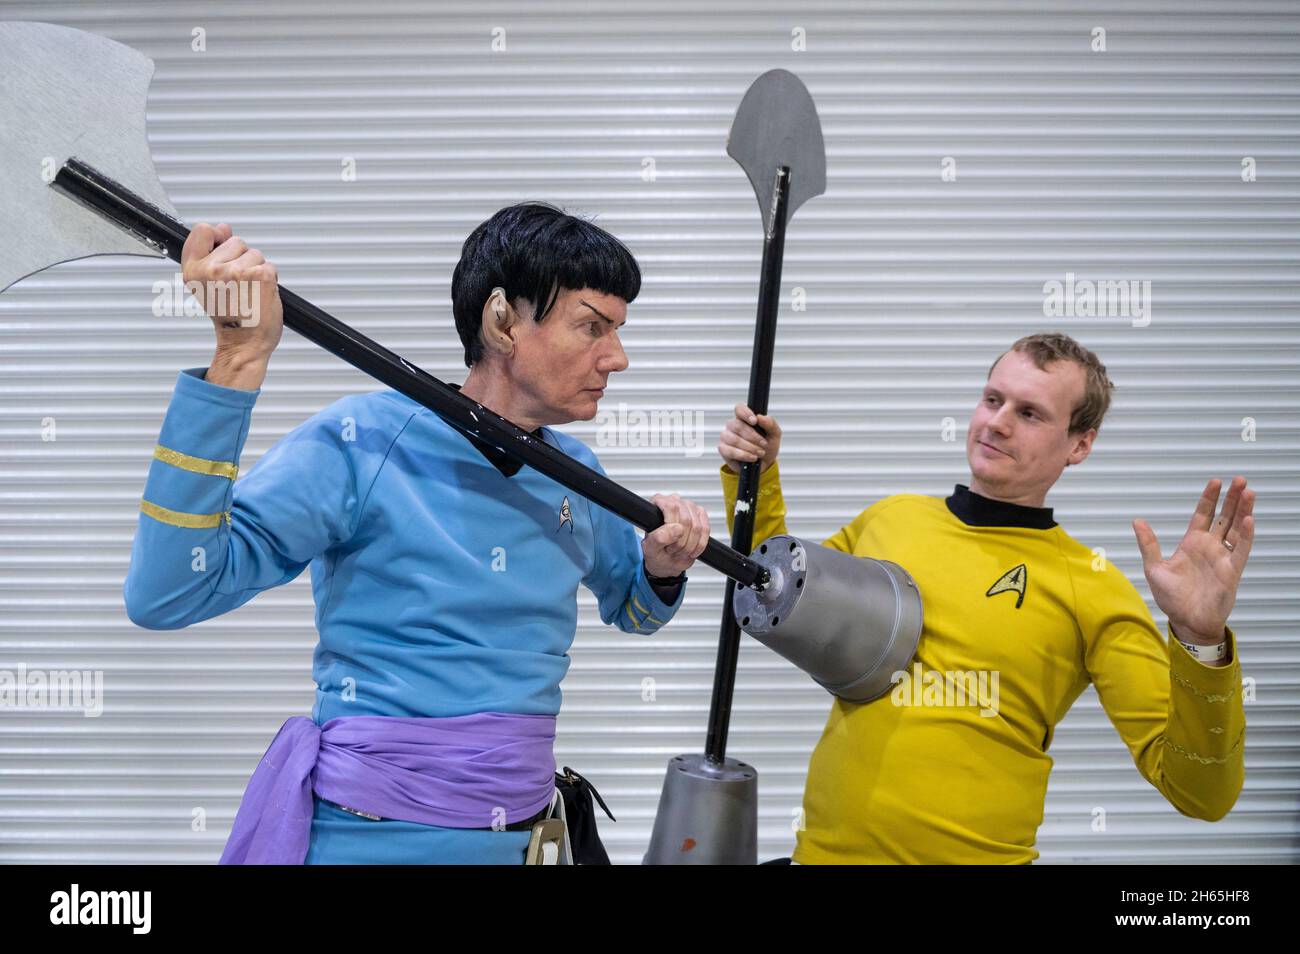 London, UK.  13 November 2021. Terry (L) and Lewis from Yorkshire, as Spock and Captain Kirk, recreate a scene from Amok Time from the original series at Destination Star Trek, Europe’s official Star Trek convention at Excel London.  The event provides fans of the popular TV series and film franchise to meet cast and crew and celebrate all things Star Trek. Credit: Stephen Chung / Alamy Live News Stock Photo